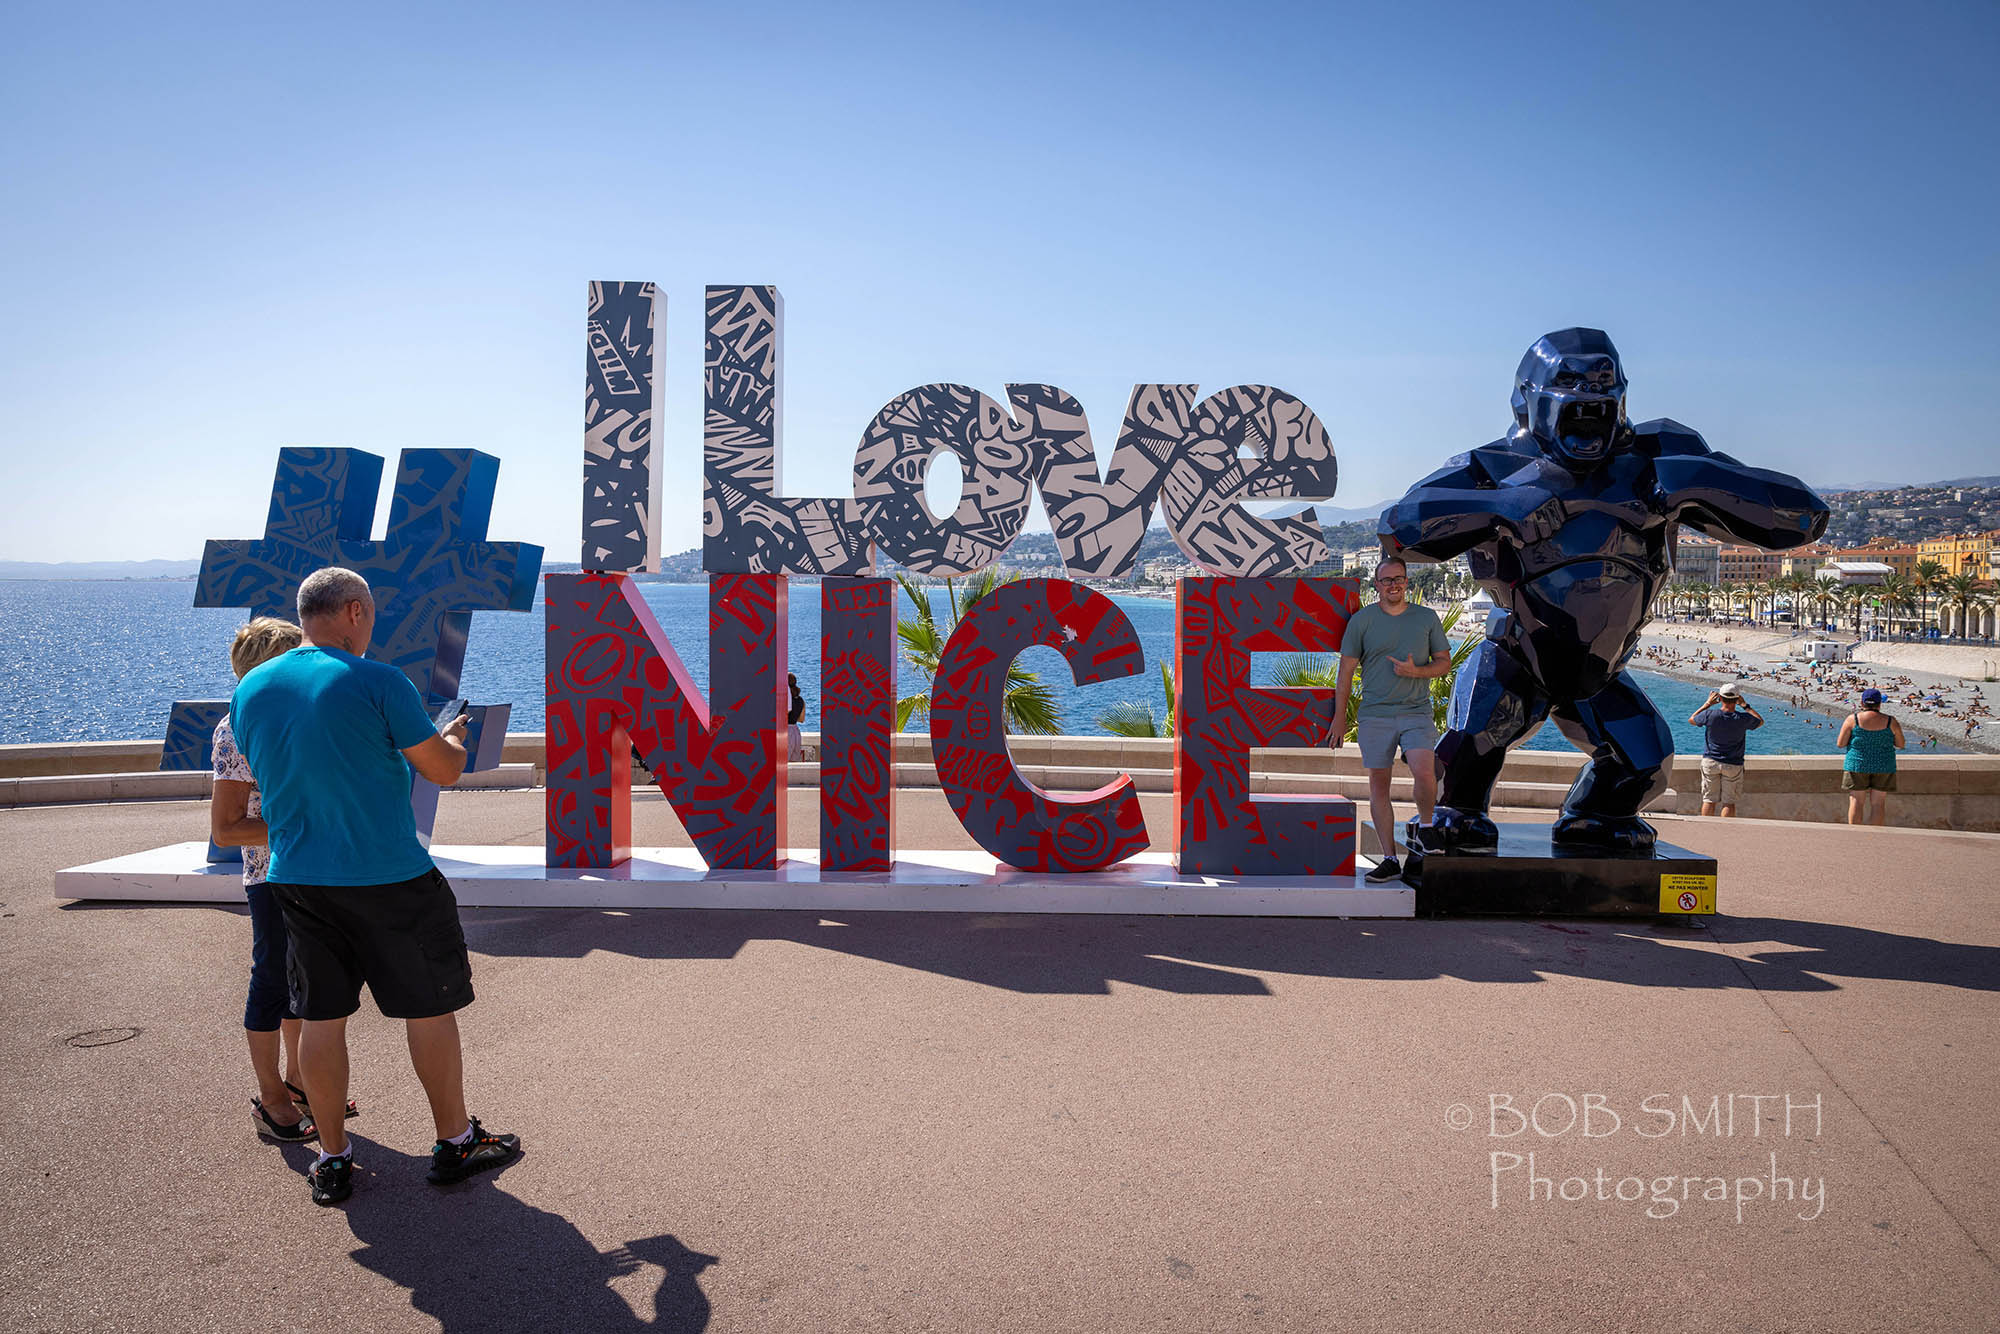 This angular Kong gorilla next to the I love Nice sign is one of 10 pop-art works by Richard Orlinski dotted around city